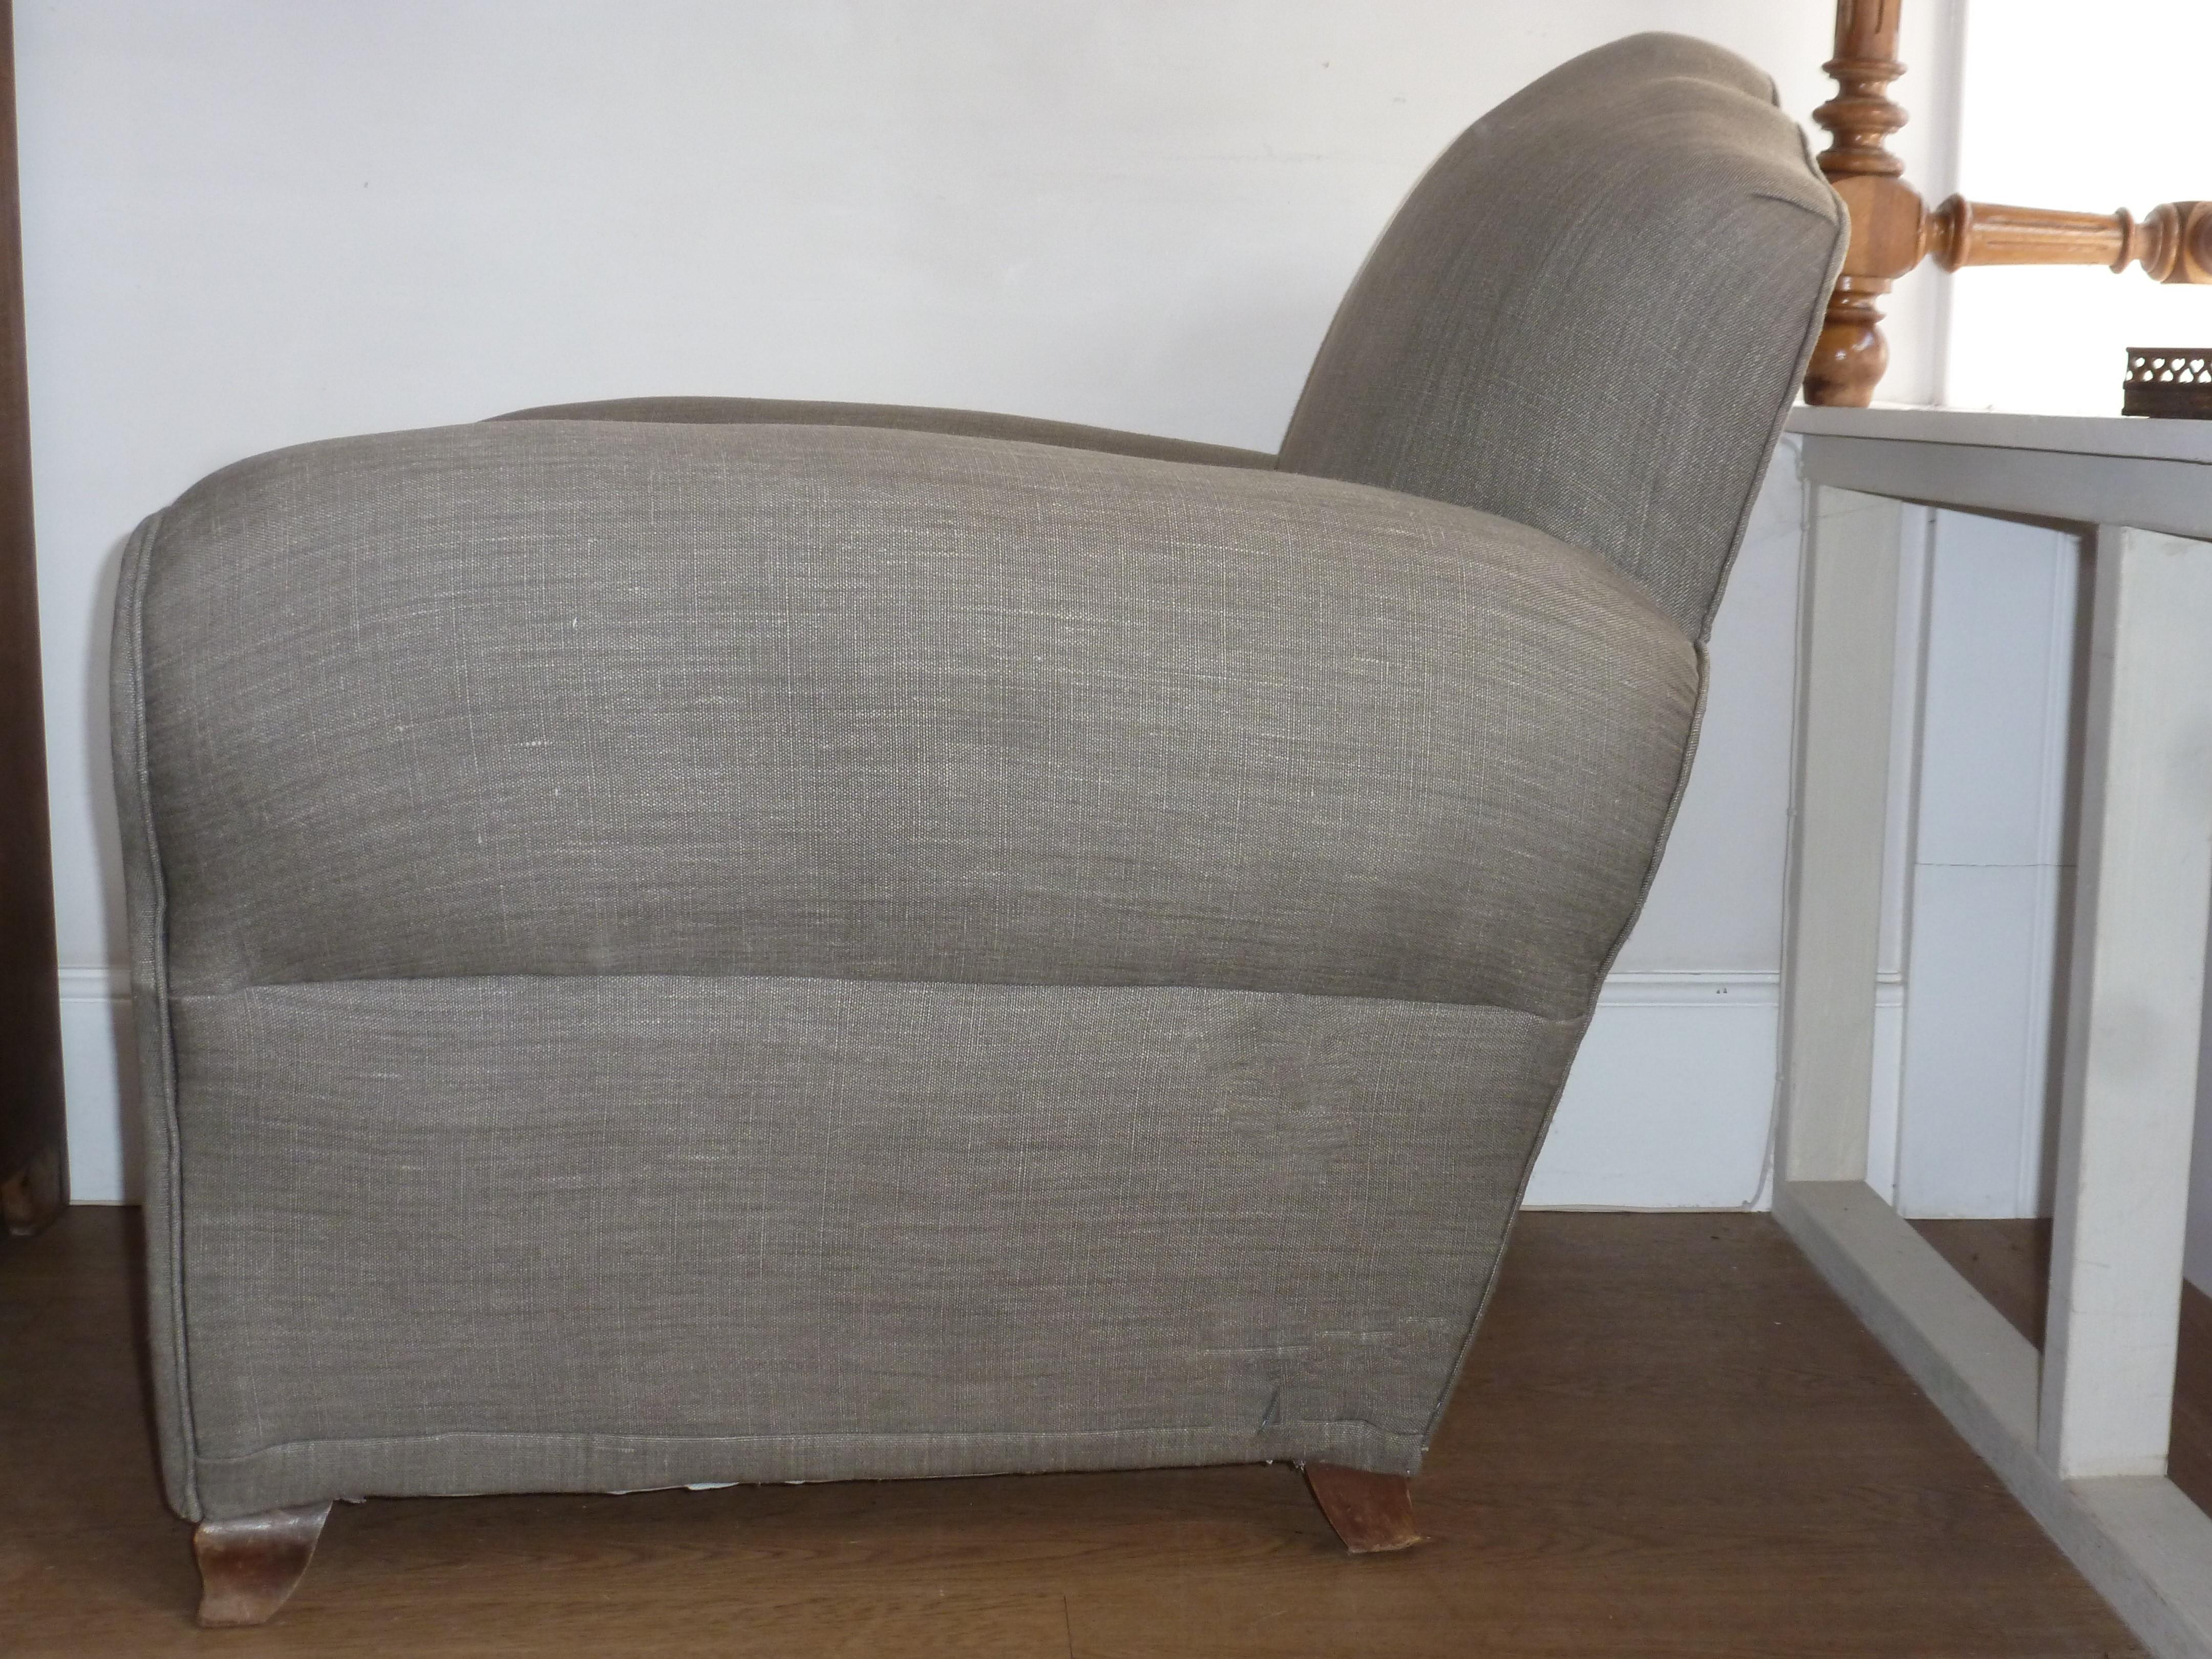 Iconic 1940 French Art Deco Club Chair Armchair Re-Upholstered Grey French Linen For Sale 2